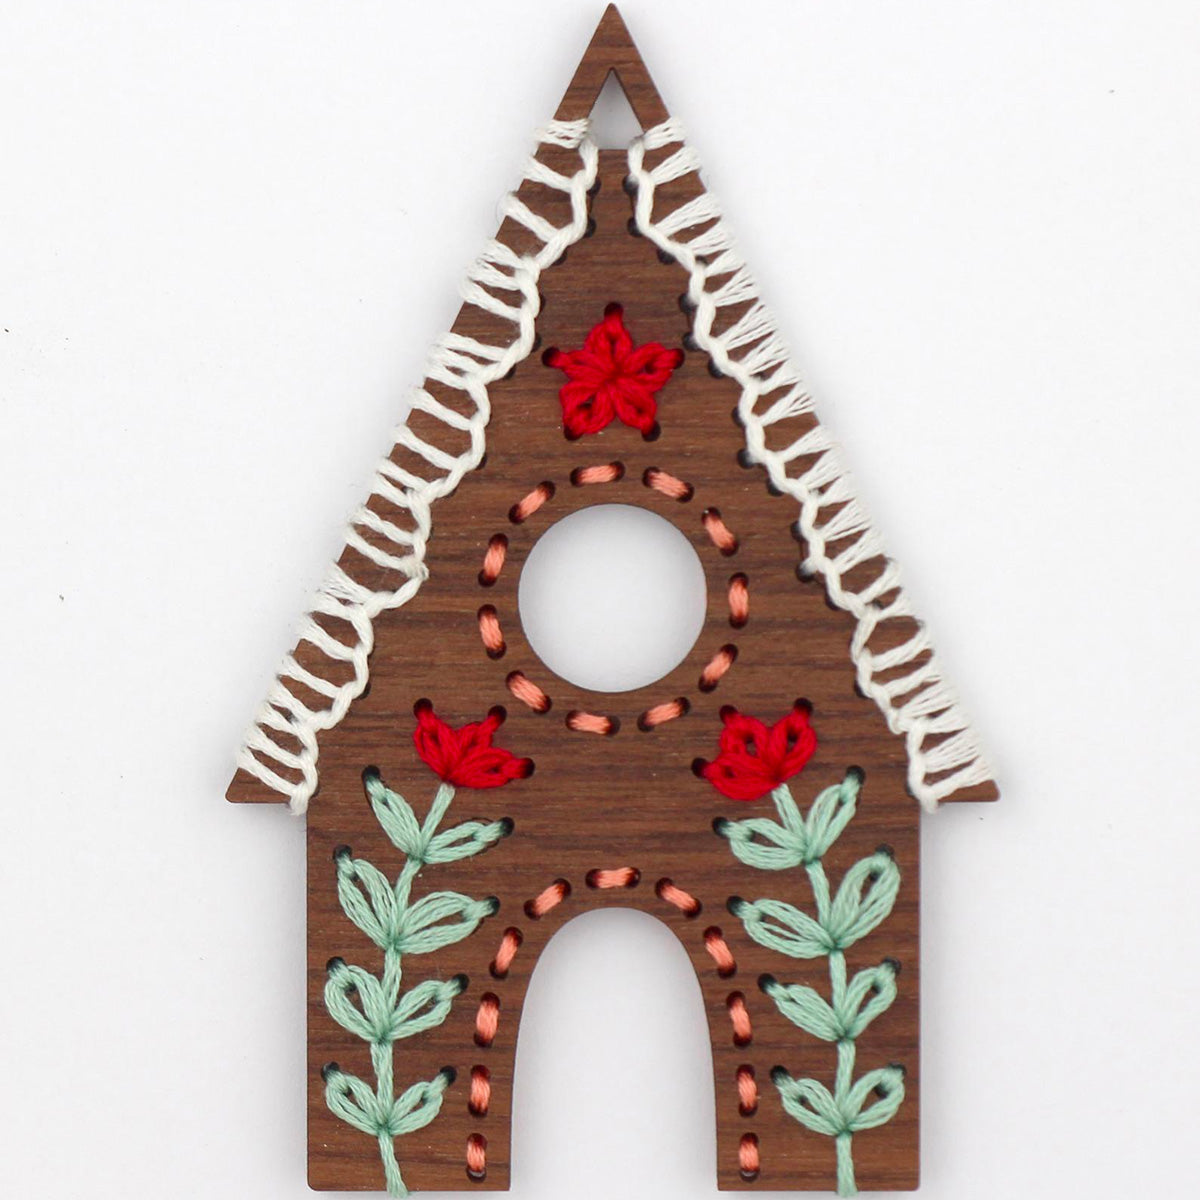 Hand Embroidered Wood Ornament Kit - Gingerbread House